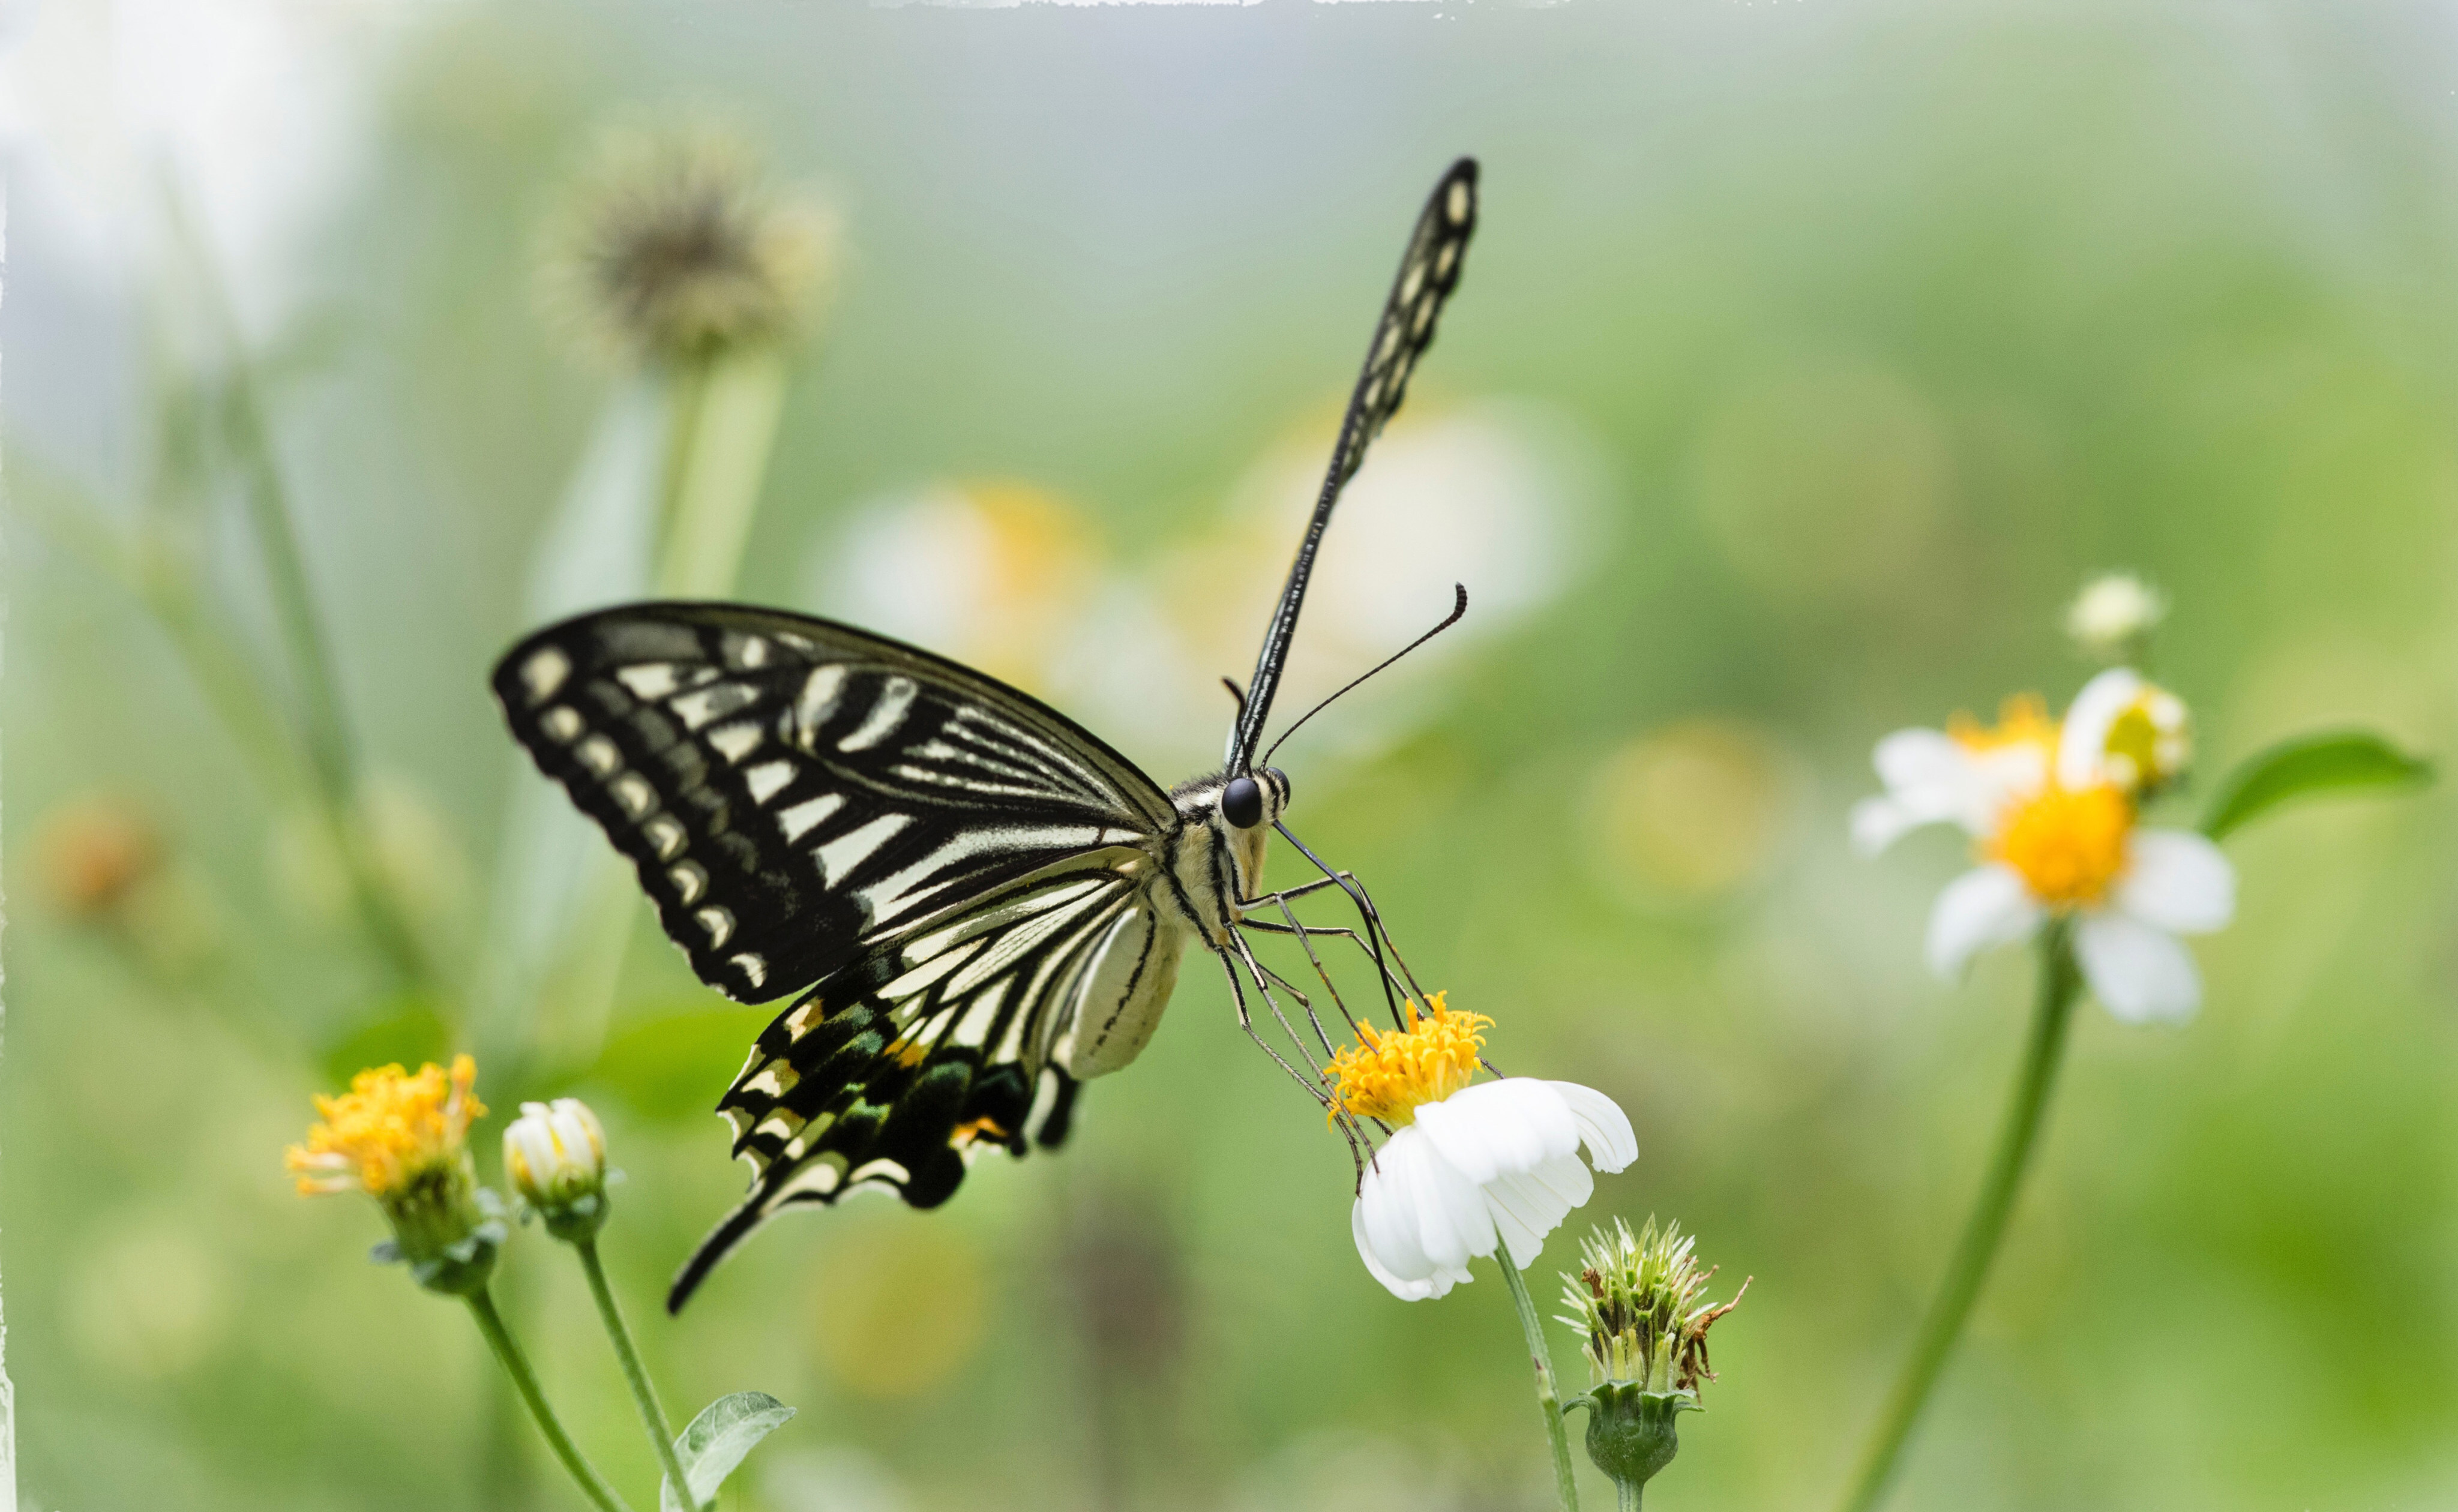 A swallowtail butterfly, one of the insect pollinators we depend on for 75 per cent of our food. Habitat loss and pesticide use are decimating insect populations, with implications for food security. Photo: Martin Chan